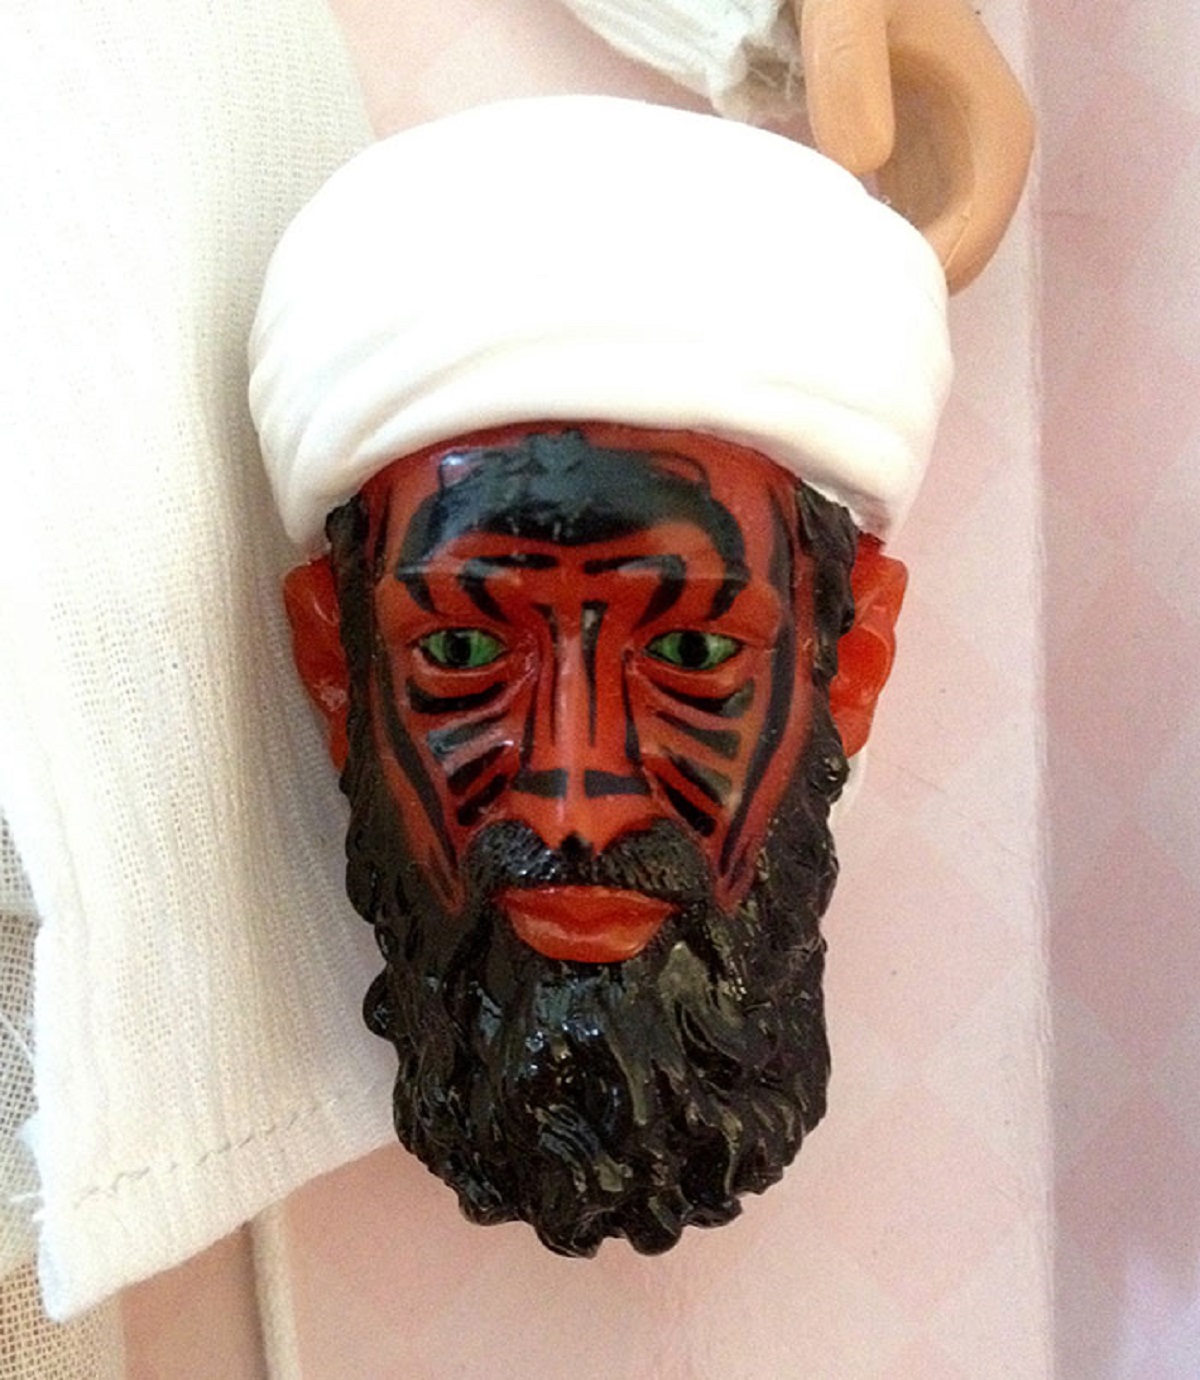 The plan to make figurines that look like Osama Bin Laden and give them to kids in South Asia. After it’s left in the sun for a certain amount of time, it’s face would peel off to reveal a “demon-like visage with red skin, green eyes, and black markings,” basically a demon. The objective was to scare kids and their parents so Bin Laden and Al Qaeda would lose support.